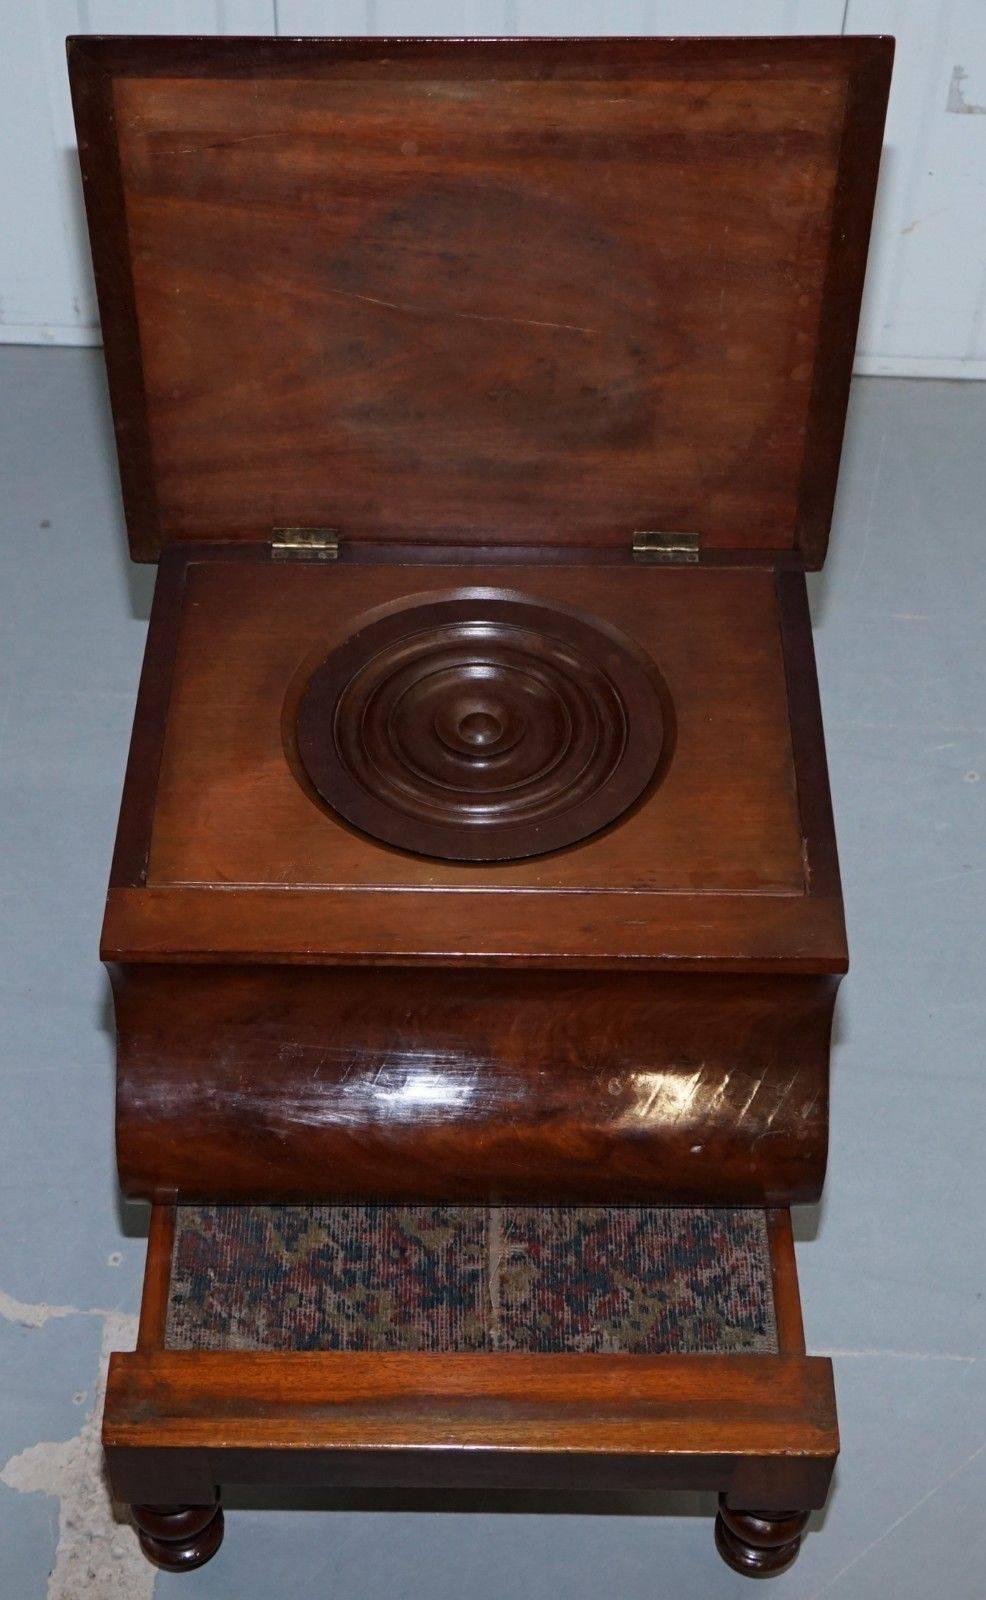 19th Century Rare Fully Complete Victorian American Bed Step Stool with Built in Chamber Pot